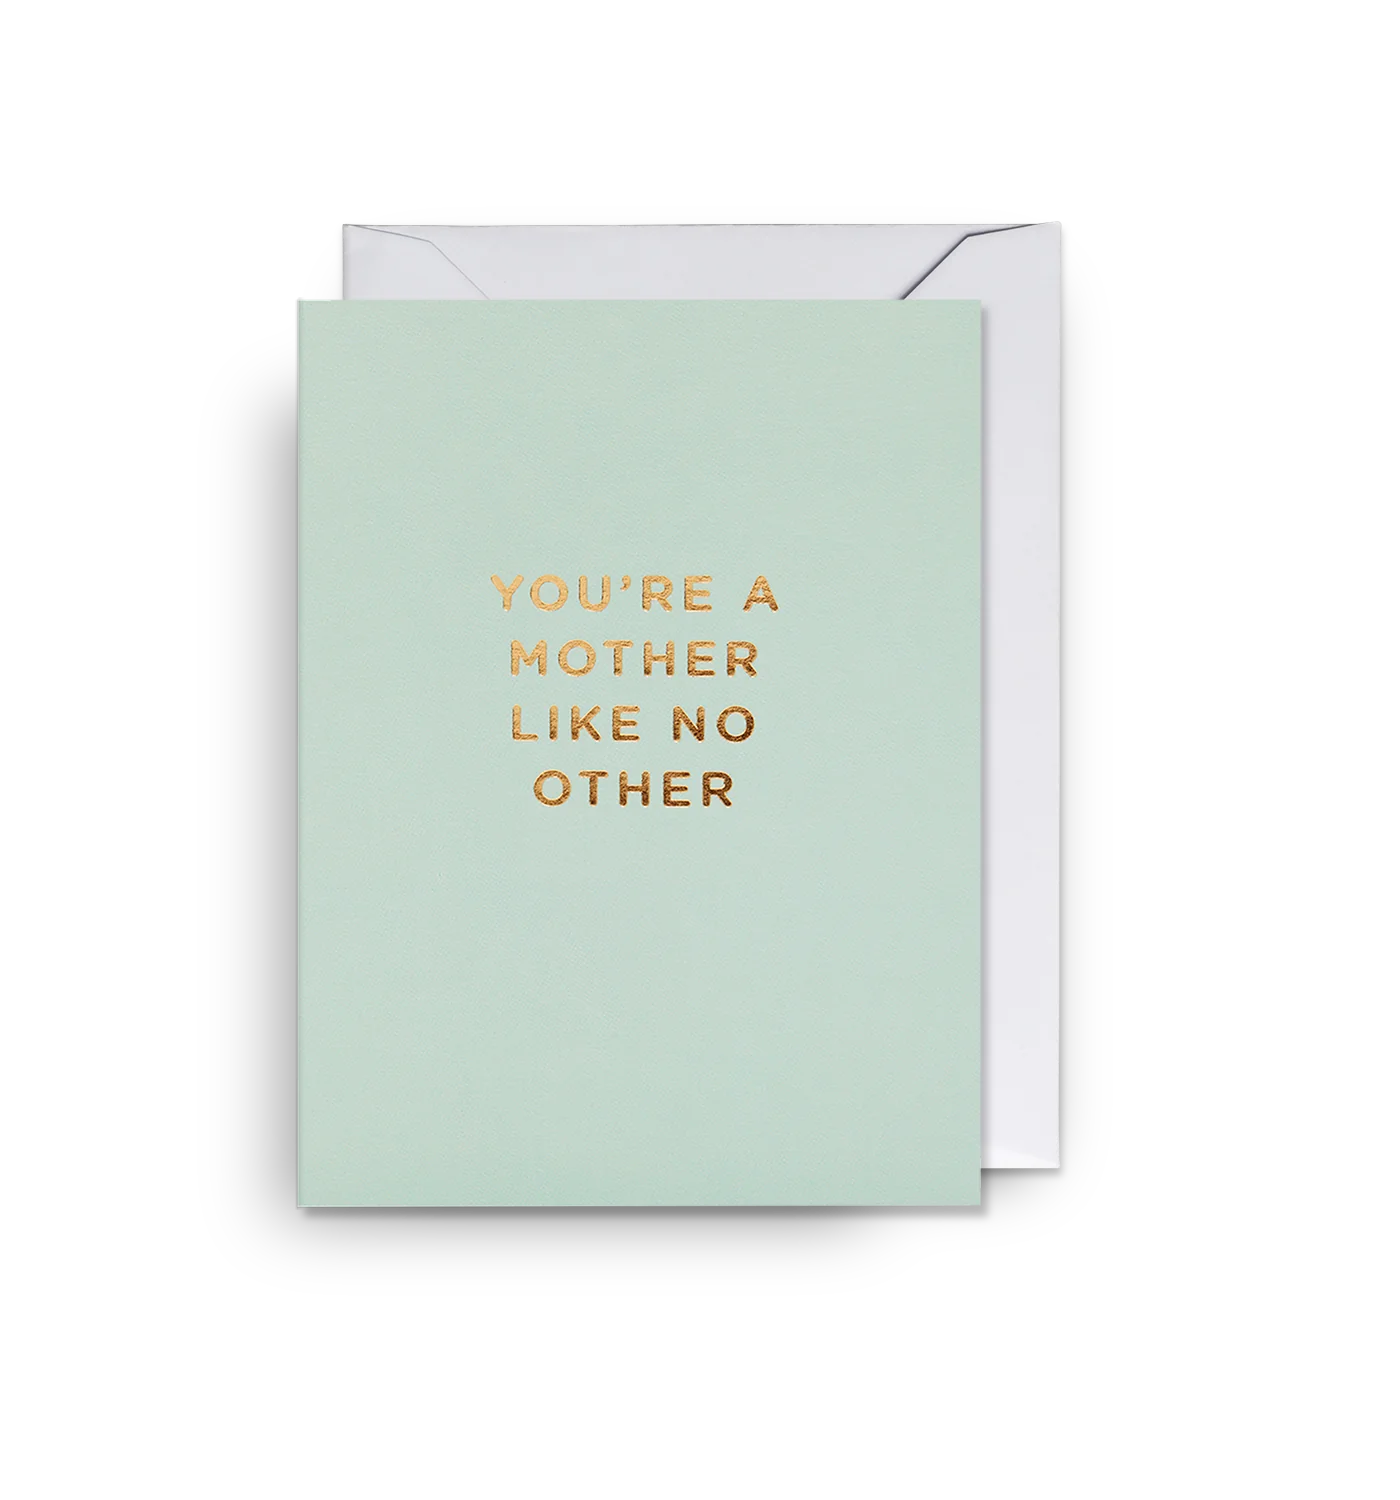 Fabulous Greeting Cards Mini Card Youre A Mother Like No Other by Weirs of Baggot Street